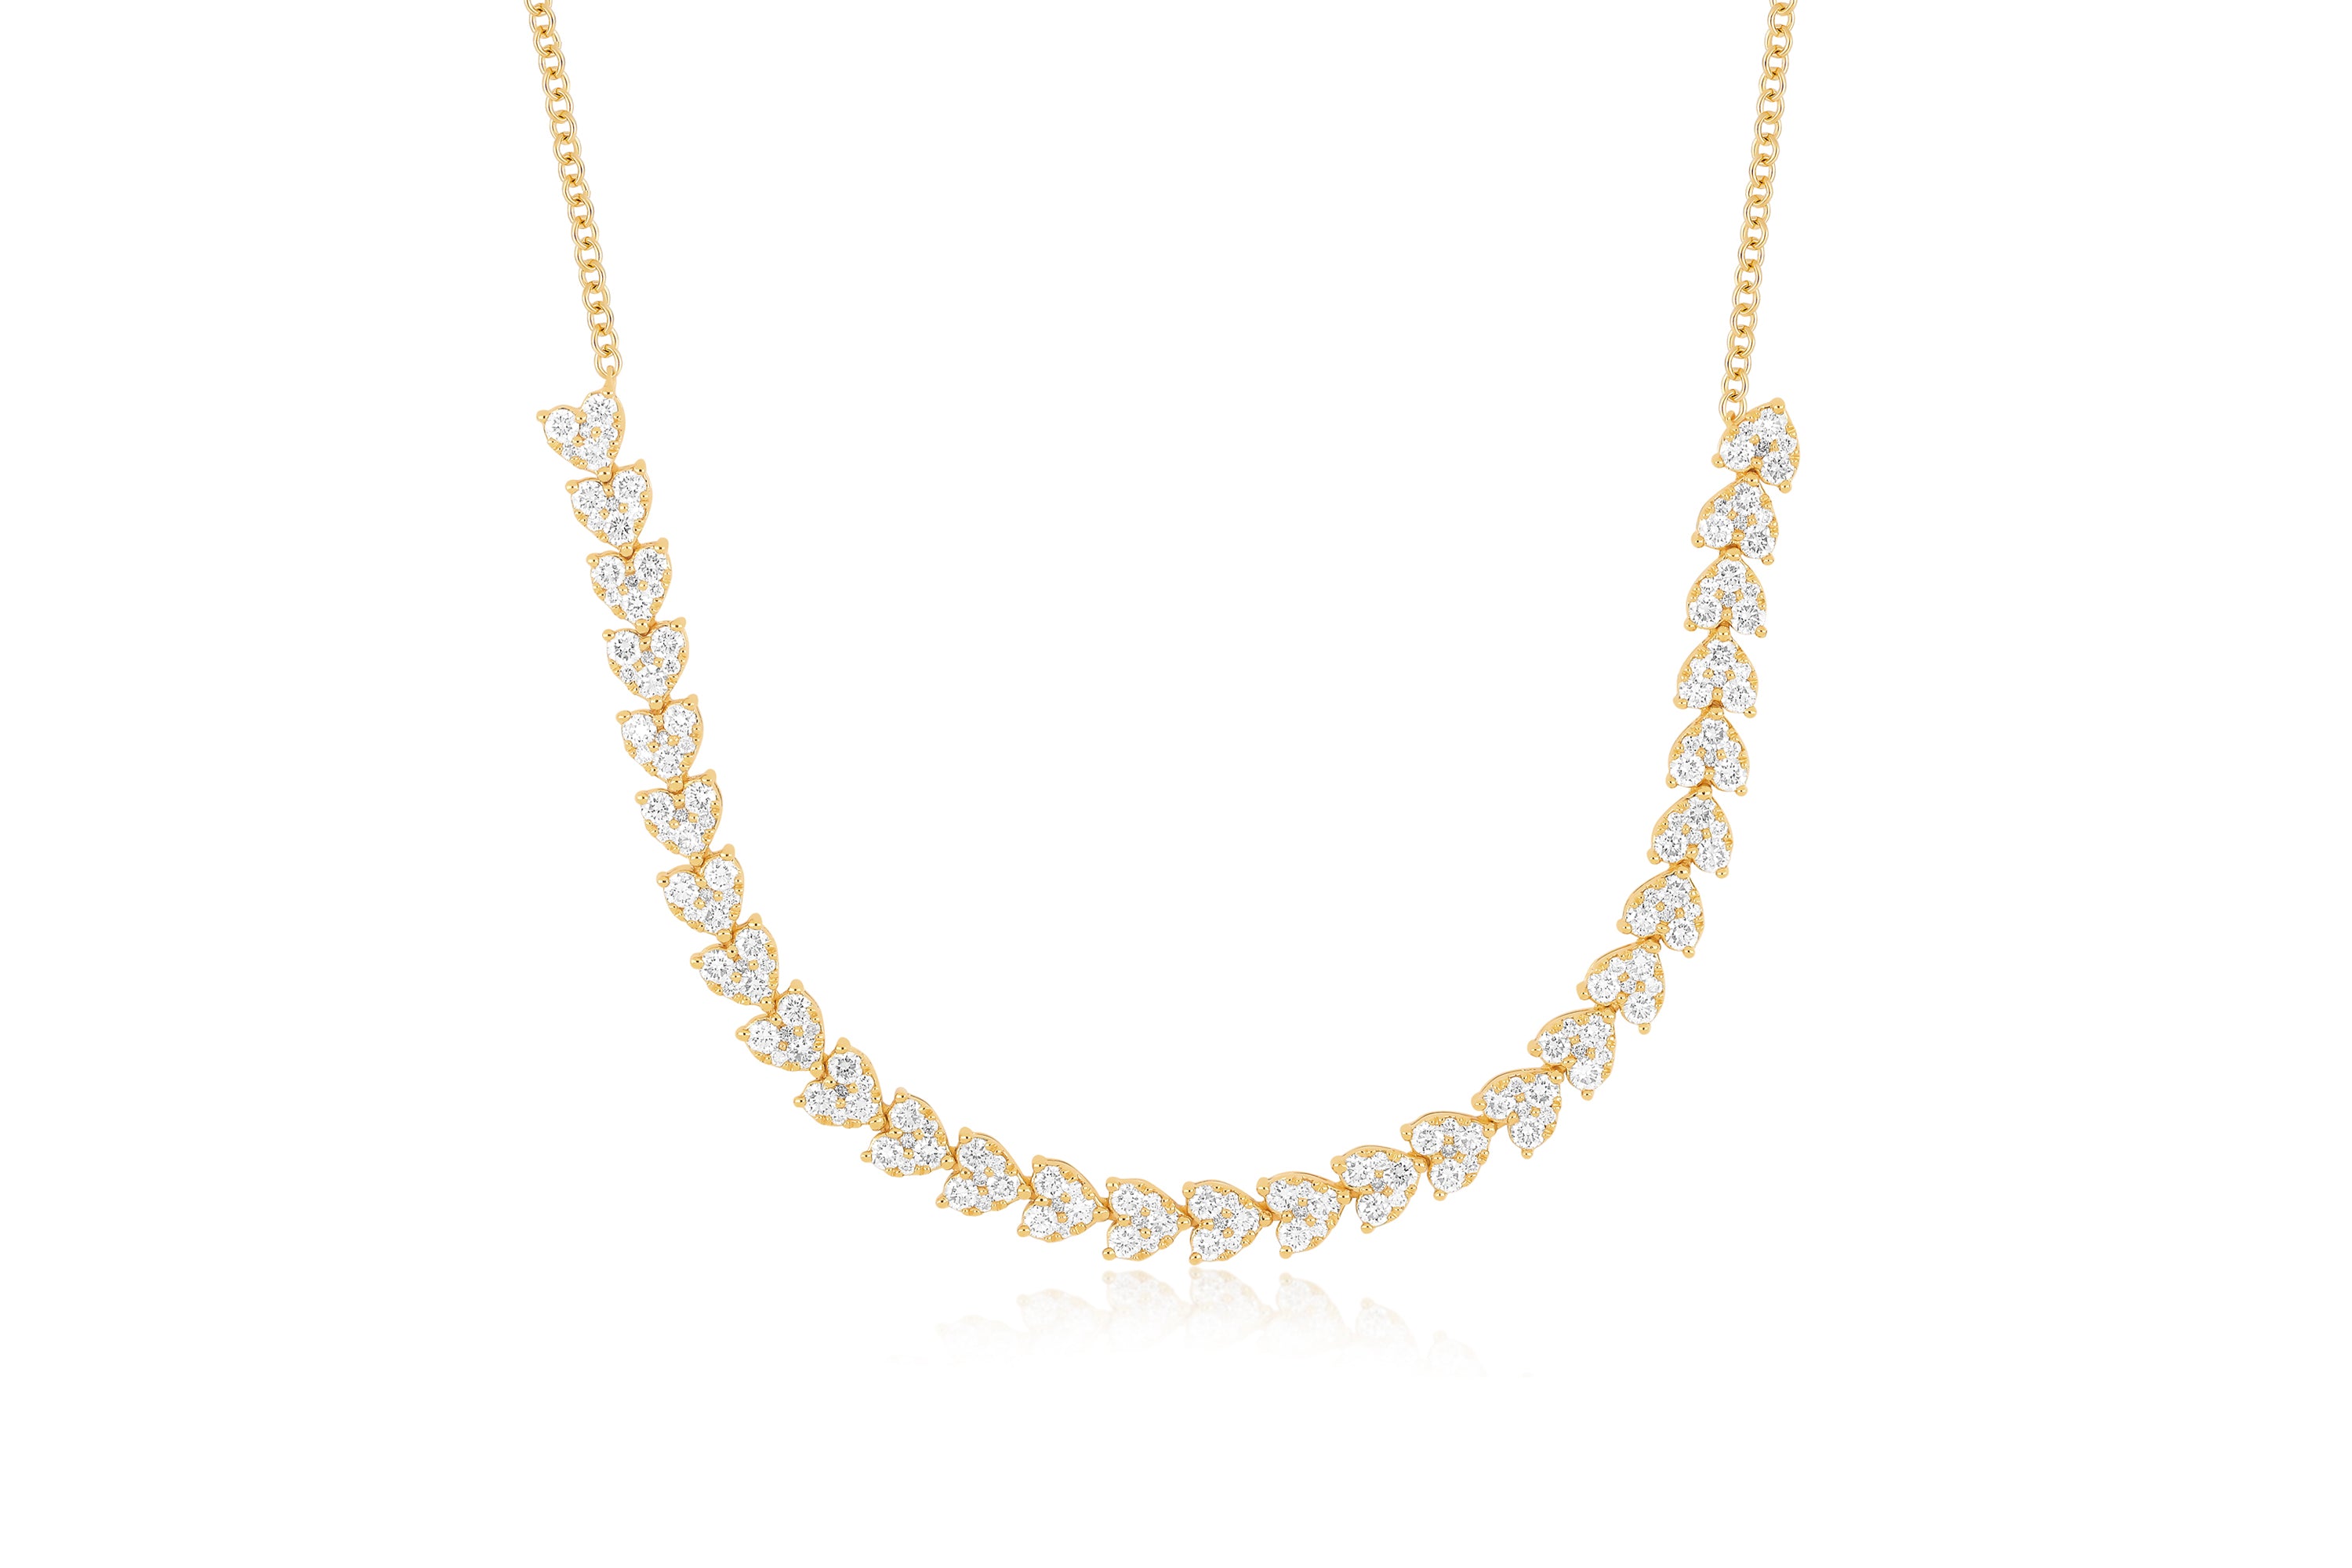 Endless Love Necklace in 14k yellow gold